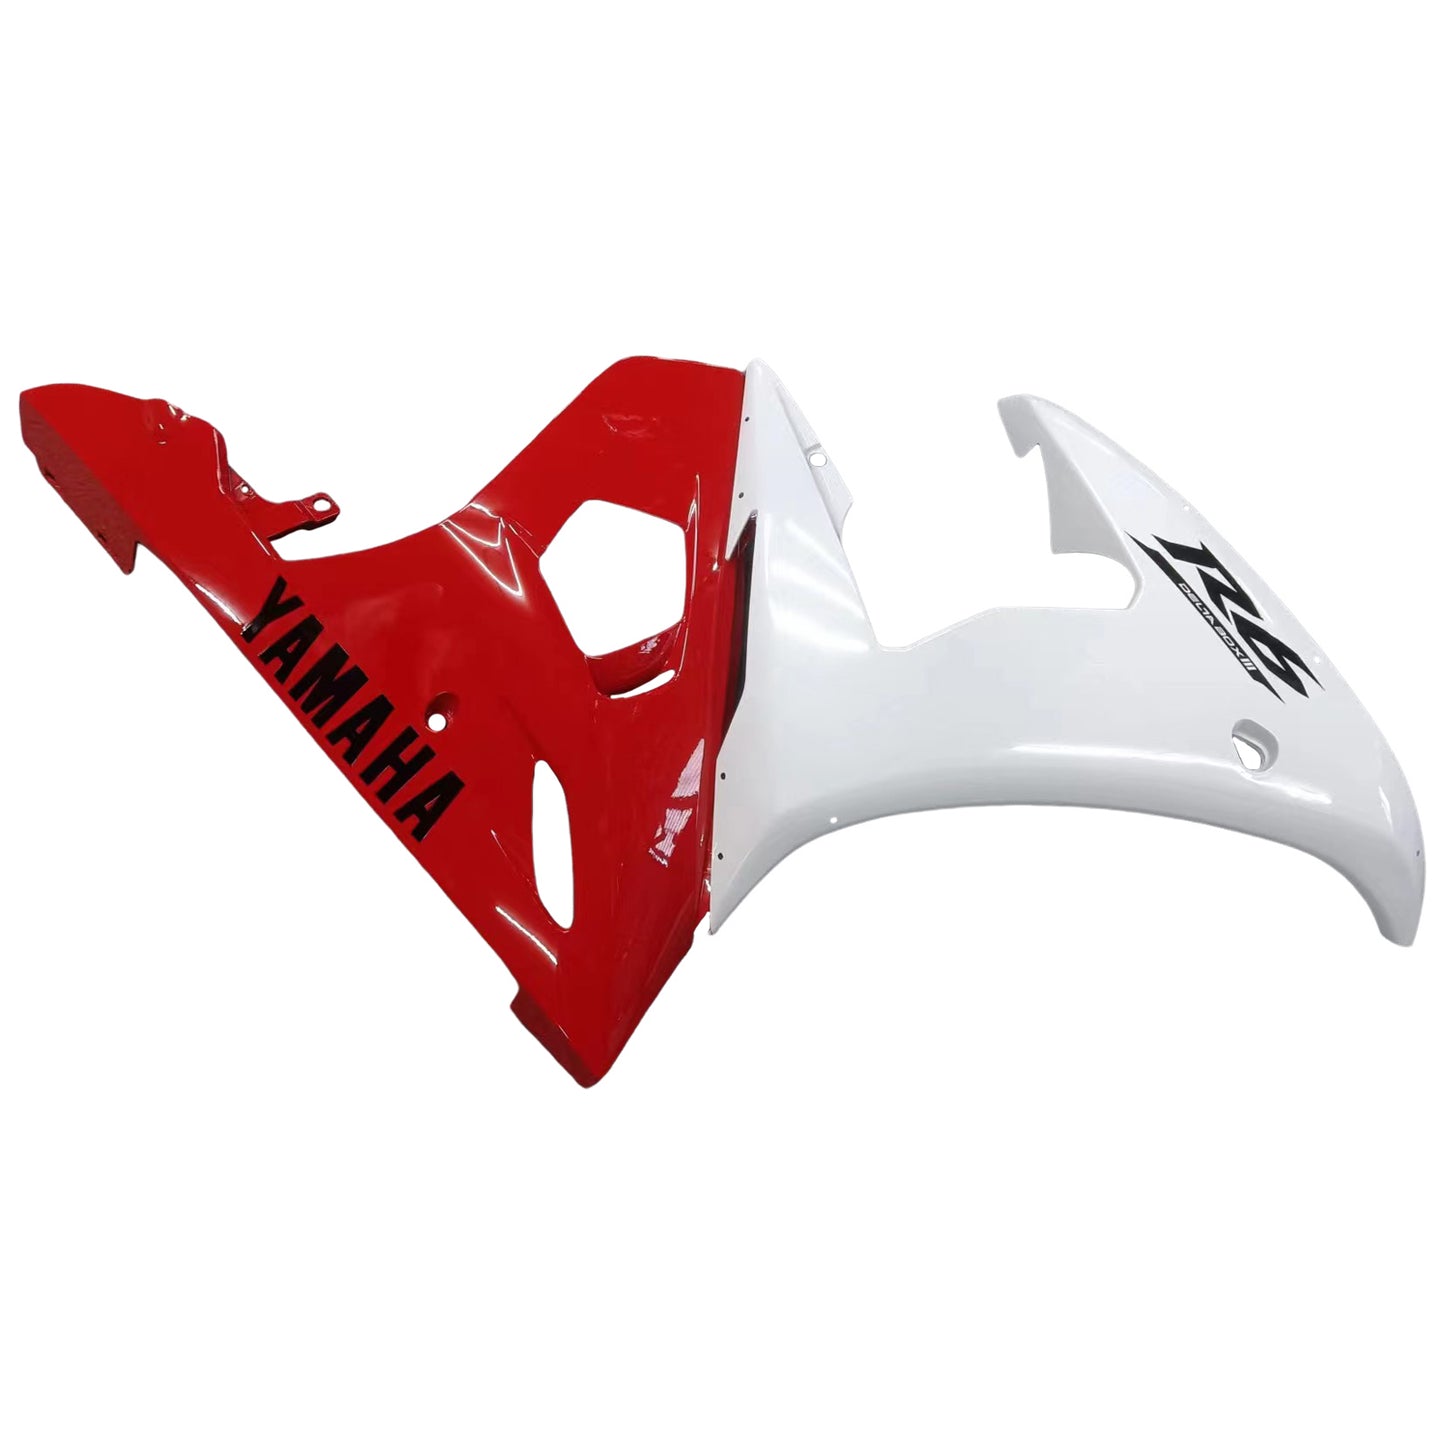 Amotopart 2003-2004 Yamaha R6 & 2006-2009 YZF R6S Verkleidung Red Mix White Kit